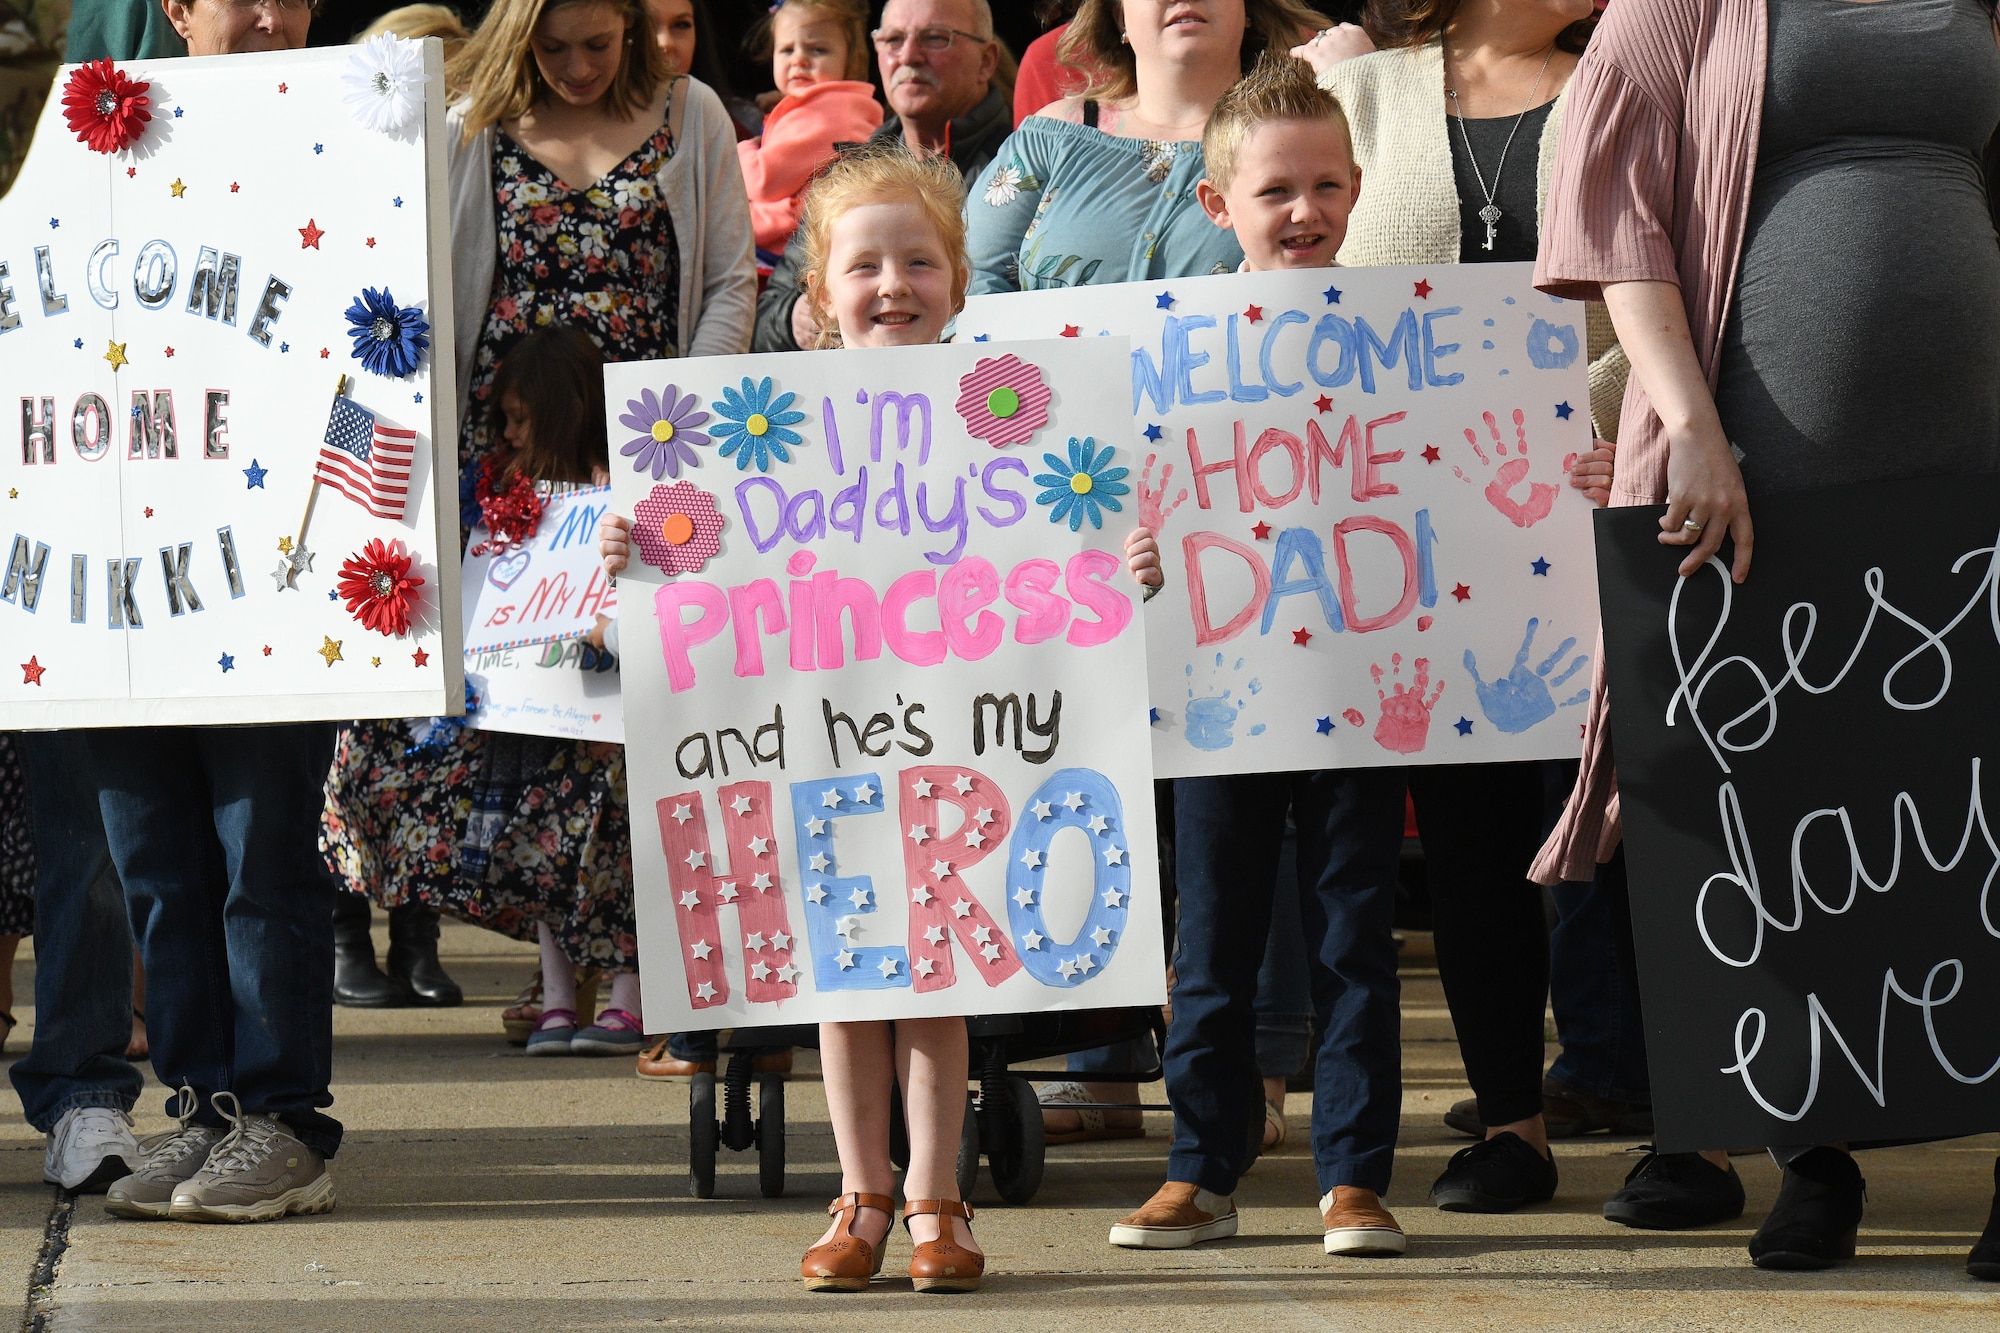 Friends and family await the return of Airmen assigned to the 729th Air Control Squadron at Hill Air Force Base, Utah, April 29, 2019, following the unit's 7-month Middle East deployment. While deployed, 729th ACS Airmen provided aircraft control and air surveillance across a 1.1 million square miles of U.S. Air Force Central Command airspace. (U.S. Air Force photo by R. Nial Bradshaw)